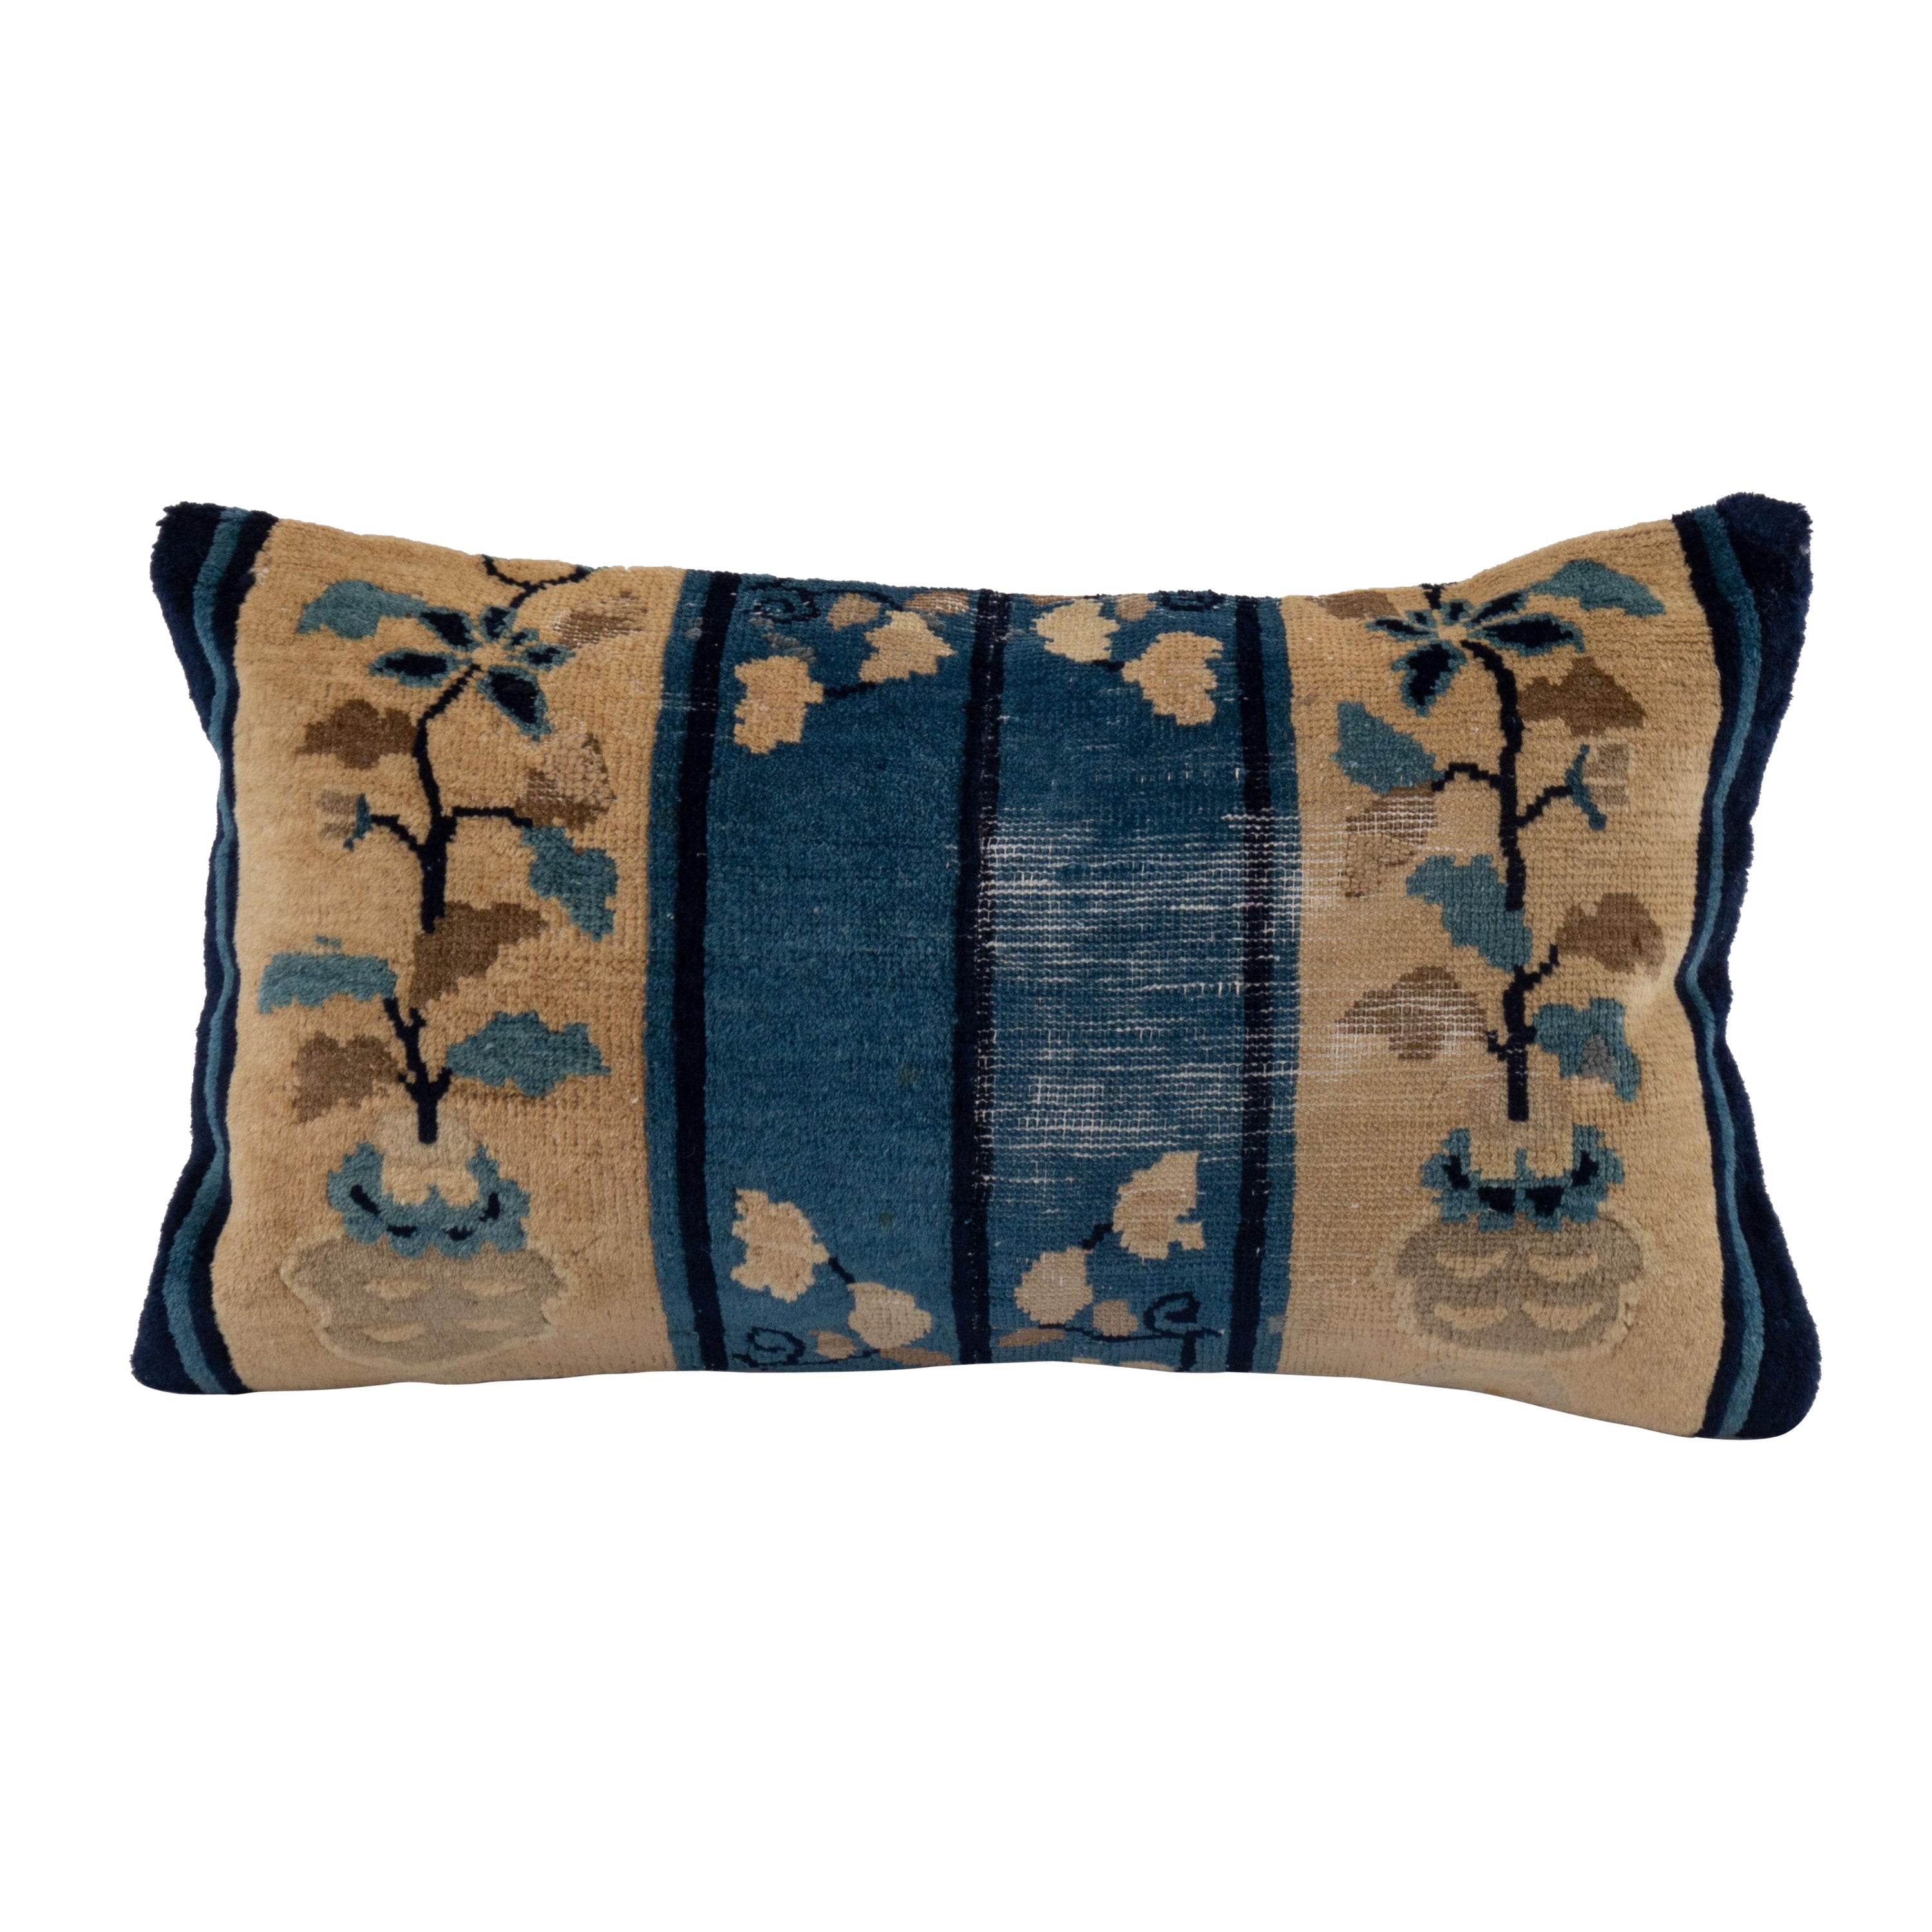 Pillow Cover Made from a Chinese Art Deco Rug, early 20th C.